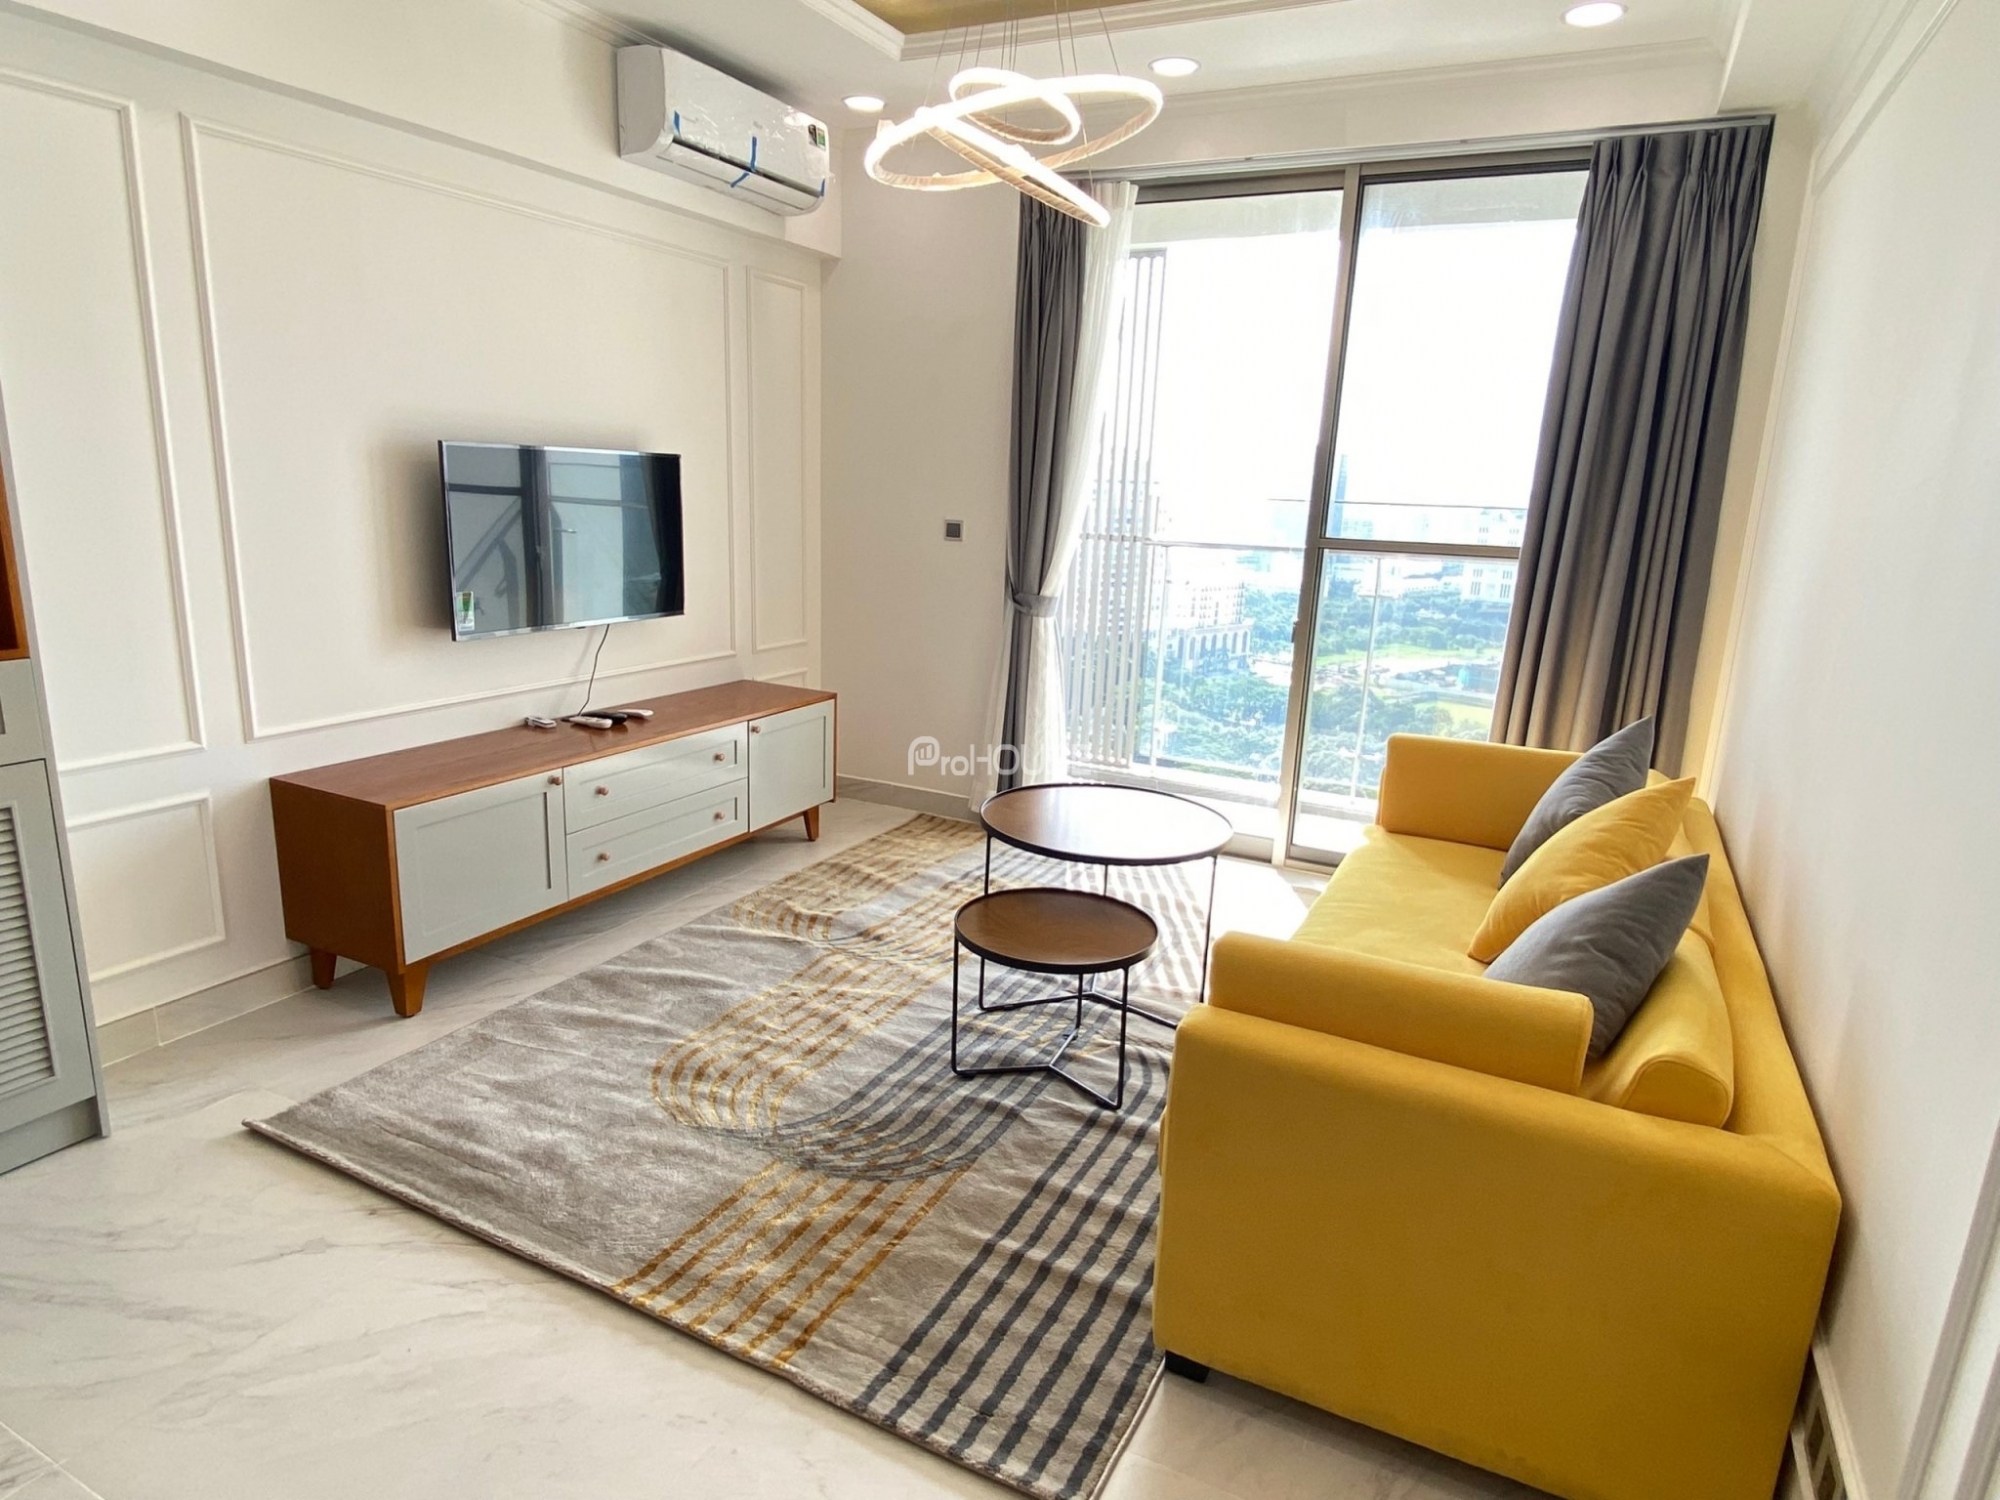 Large 3-bedroom apartment for rent in The Signature-Midtown with modern furniture